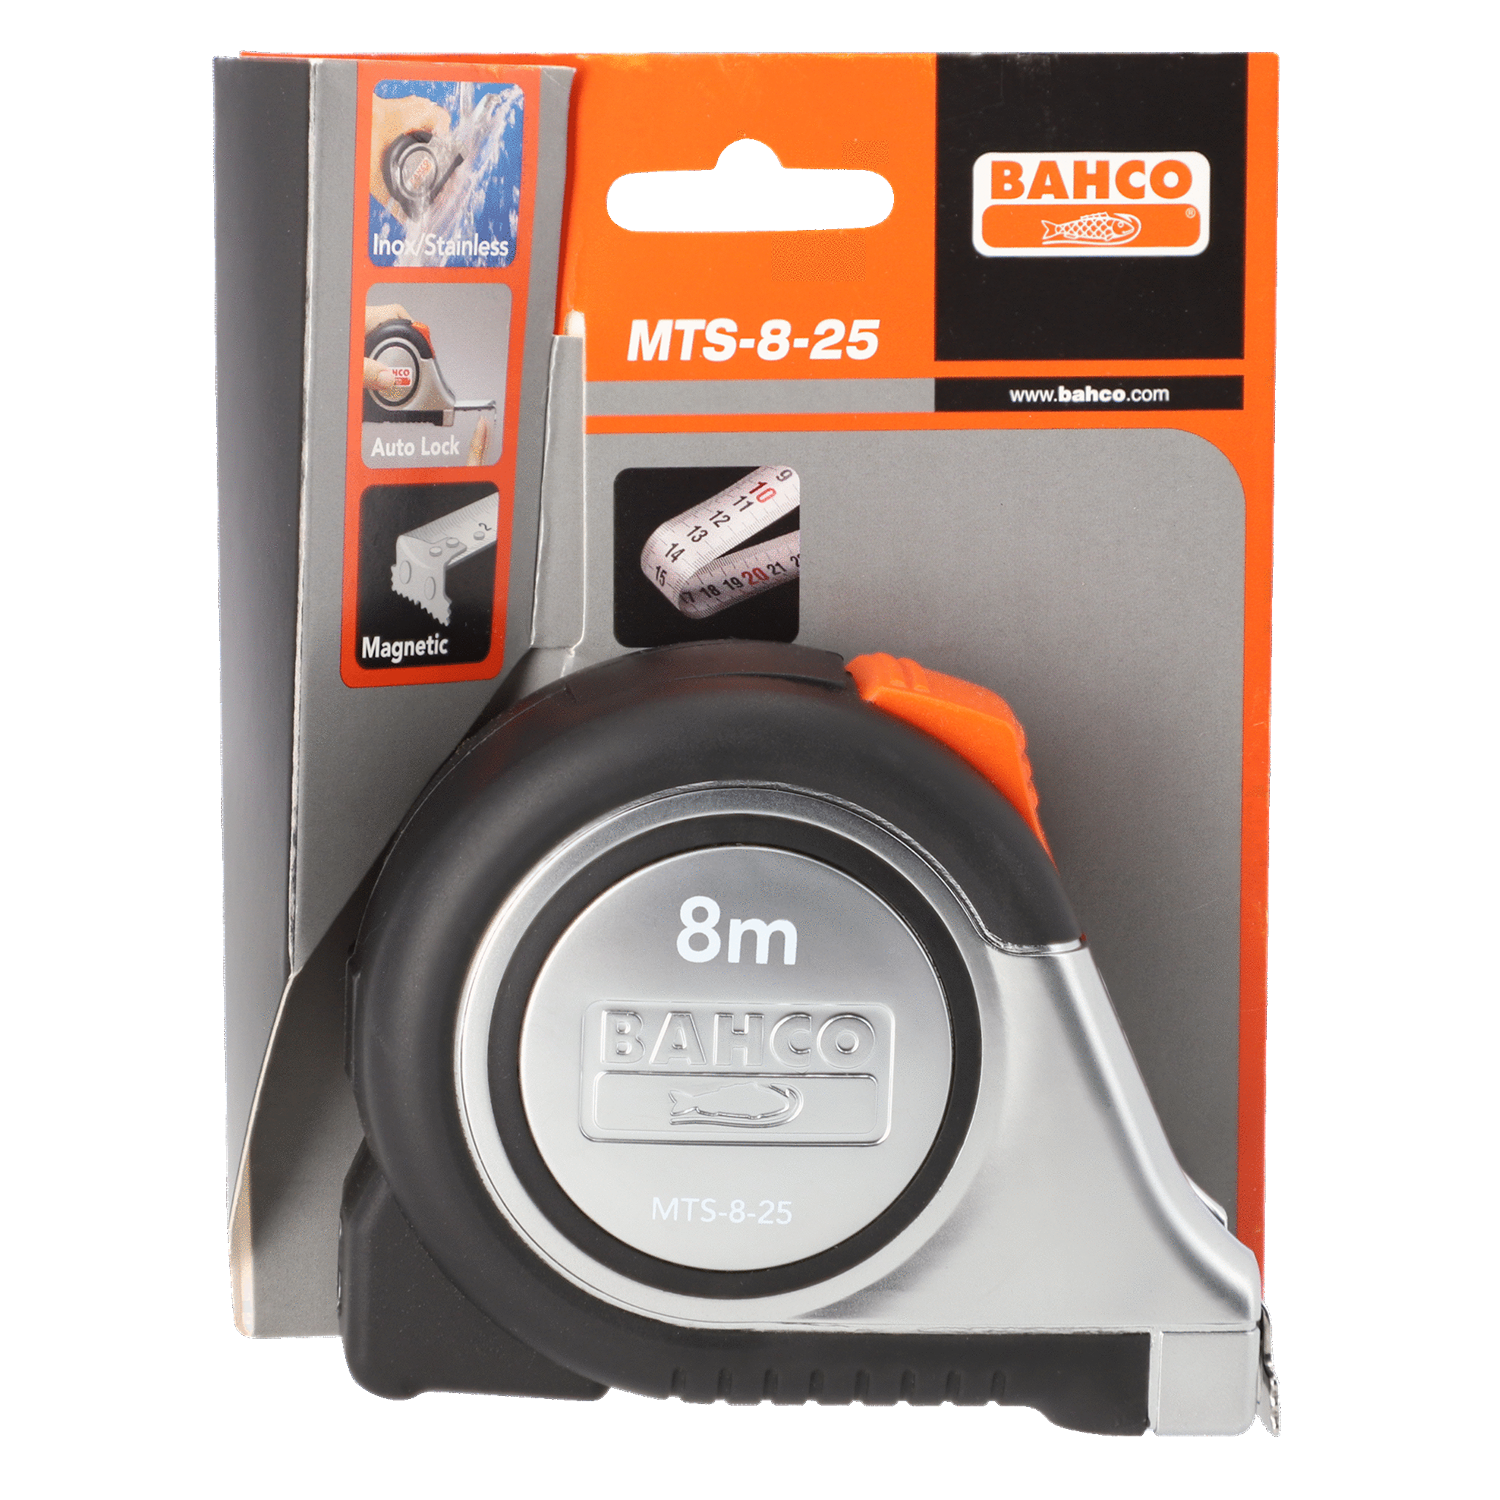 BAHCO MTS Double-Sided Measuring Tape with Rubber Grip - Premium Measuring Tape from BAHCO - Shop now at Yew Aik.